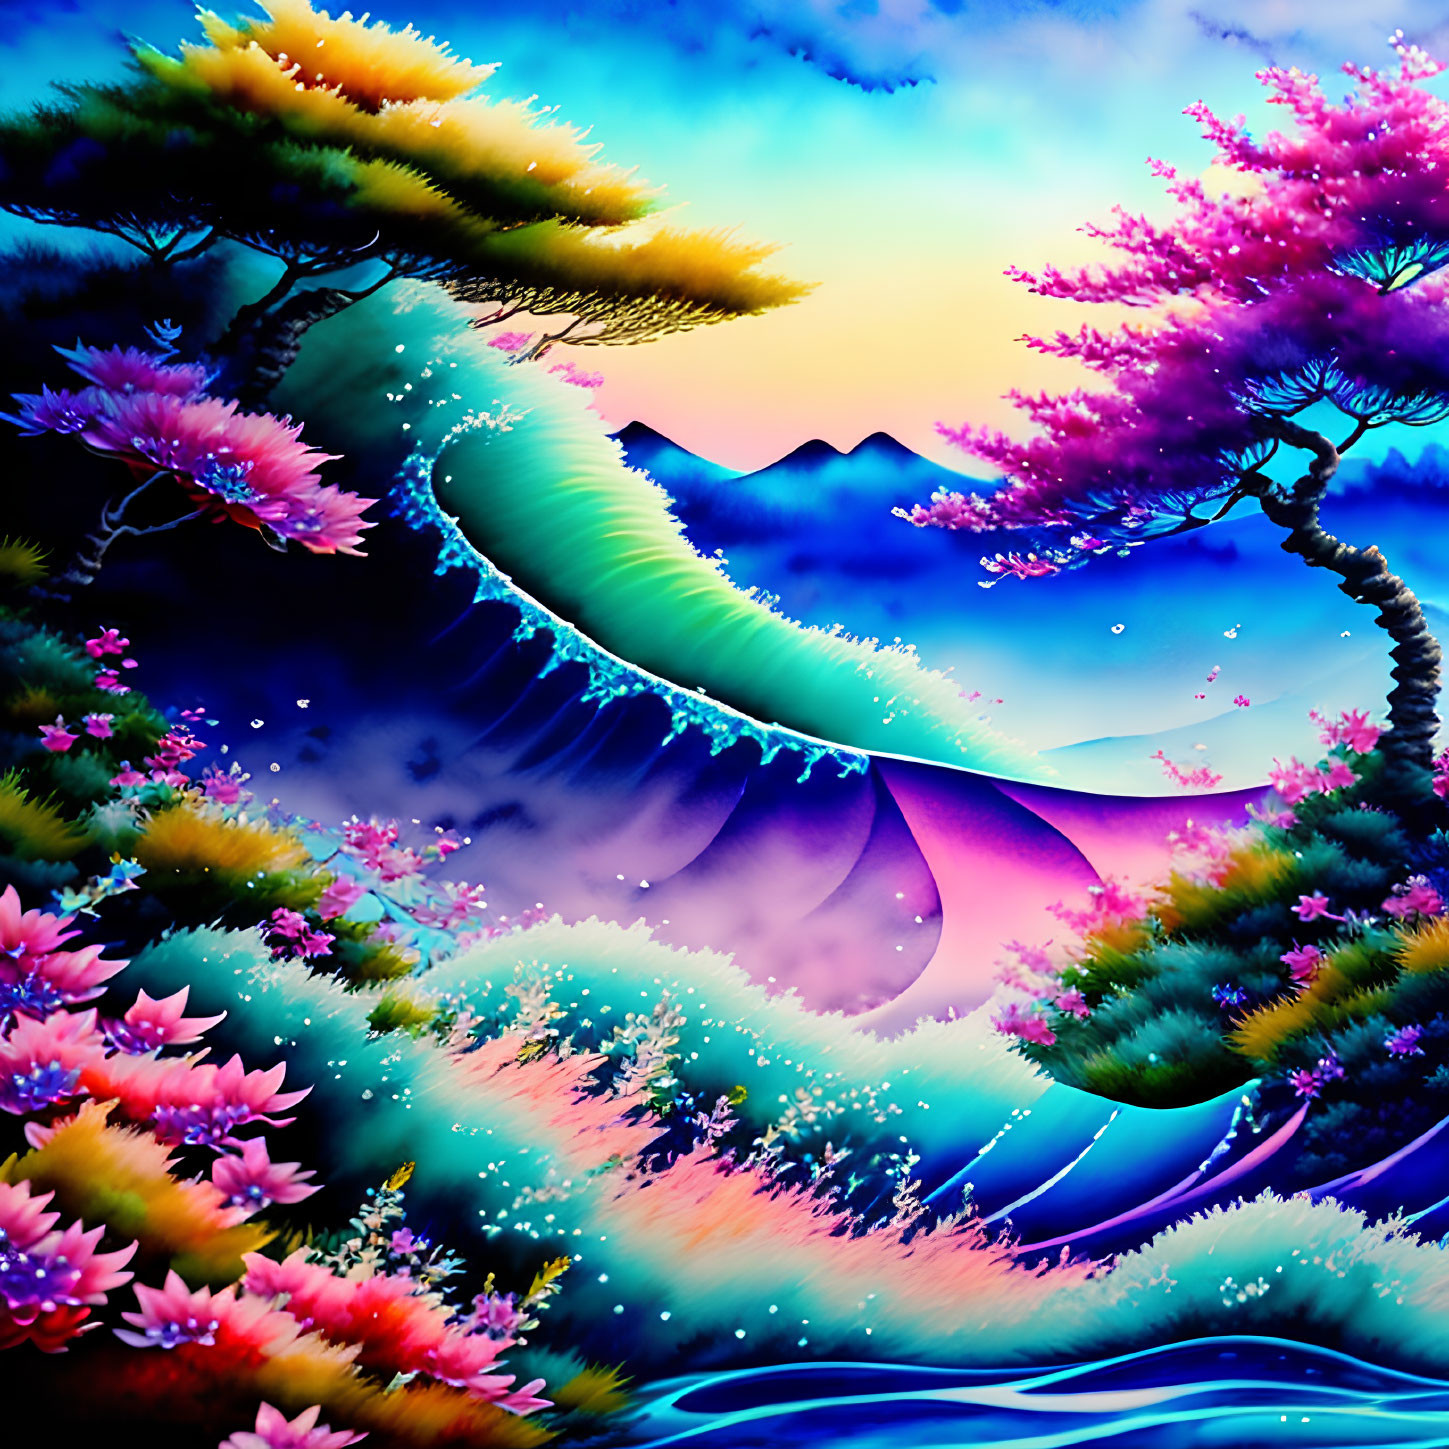 Colorful digital artwork: surreal landscape with neon trees, flowery hills, mystic mountain.